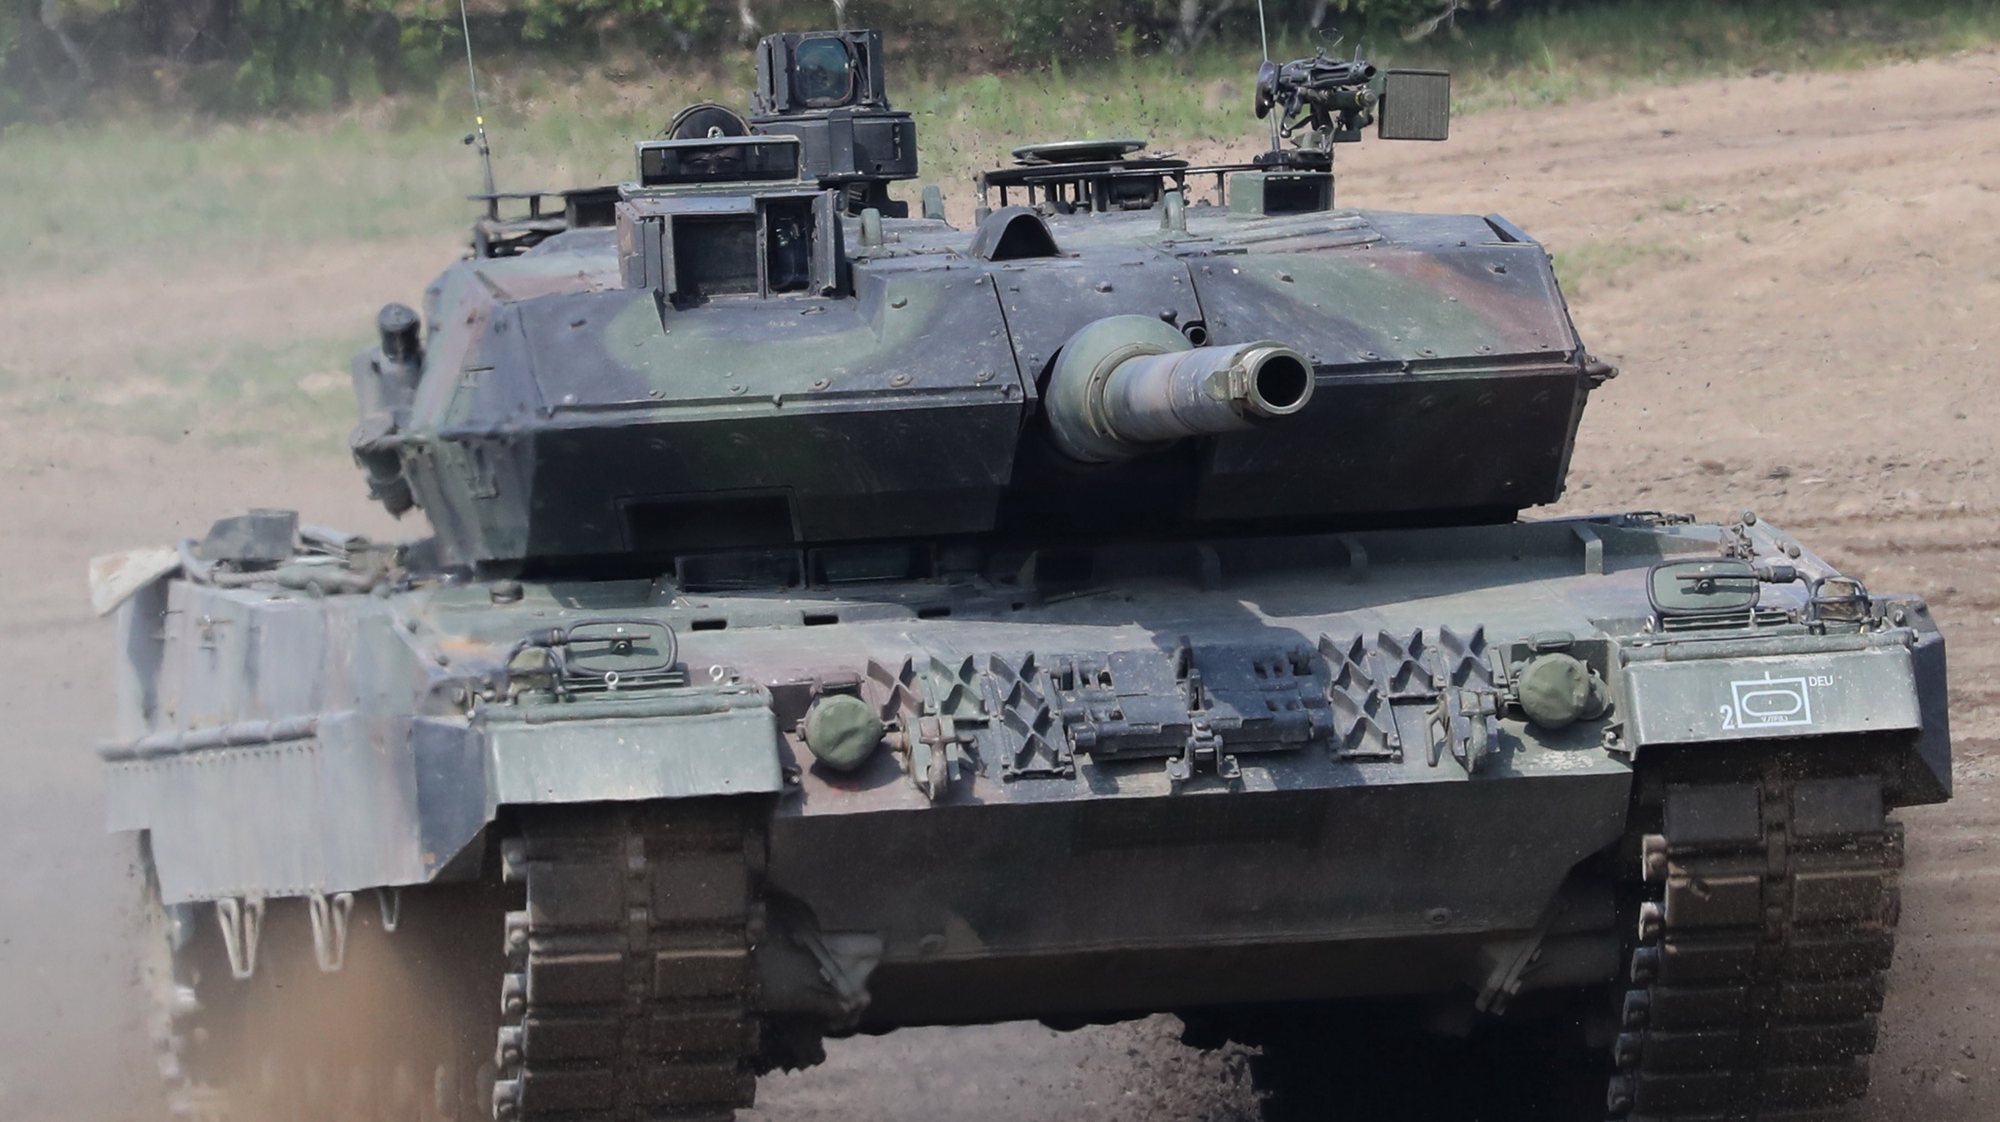 epa07586786 A Leopard 2 tank during the NATO Very High Readiness Task Force Land (VJTF L 2019) exercise in Muenster, northen Germany, 20 May 2019. The German Bundeswehr with its Armoured Training Brigade 9 (Panzerlehrbrigade 9) serves as spearhead of the VJTF L in 2019.  EPA/FOCKE STRANGMANN